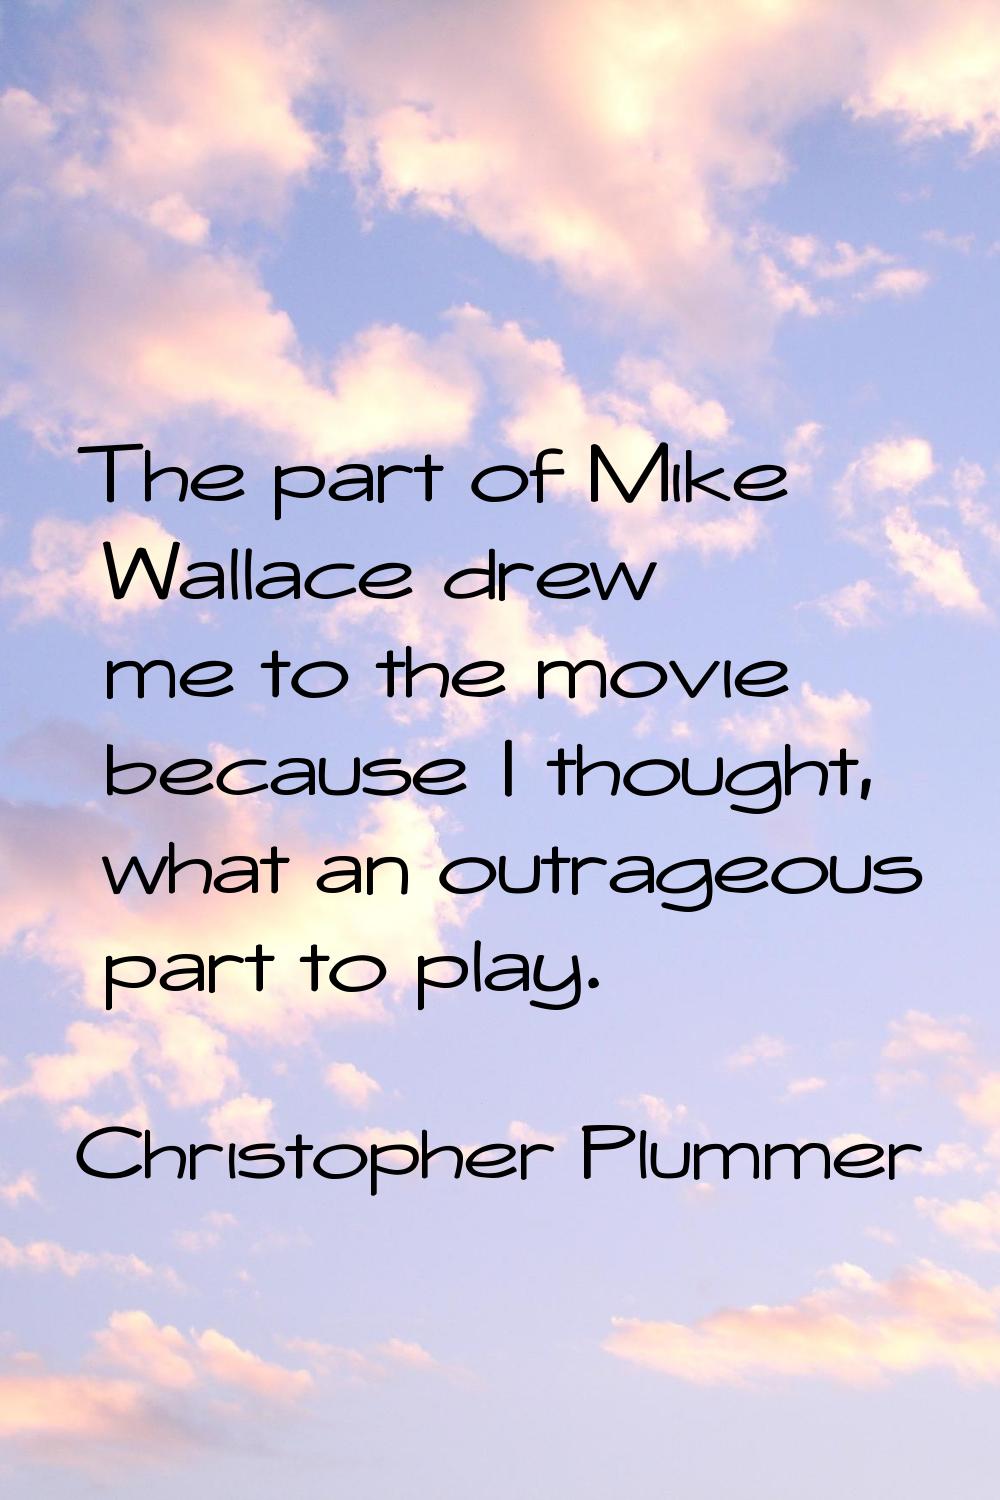 The part of Mike Wallace drew me to the movie because I thought, what an outrageous part to play.